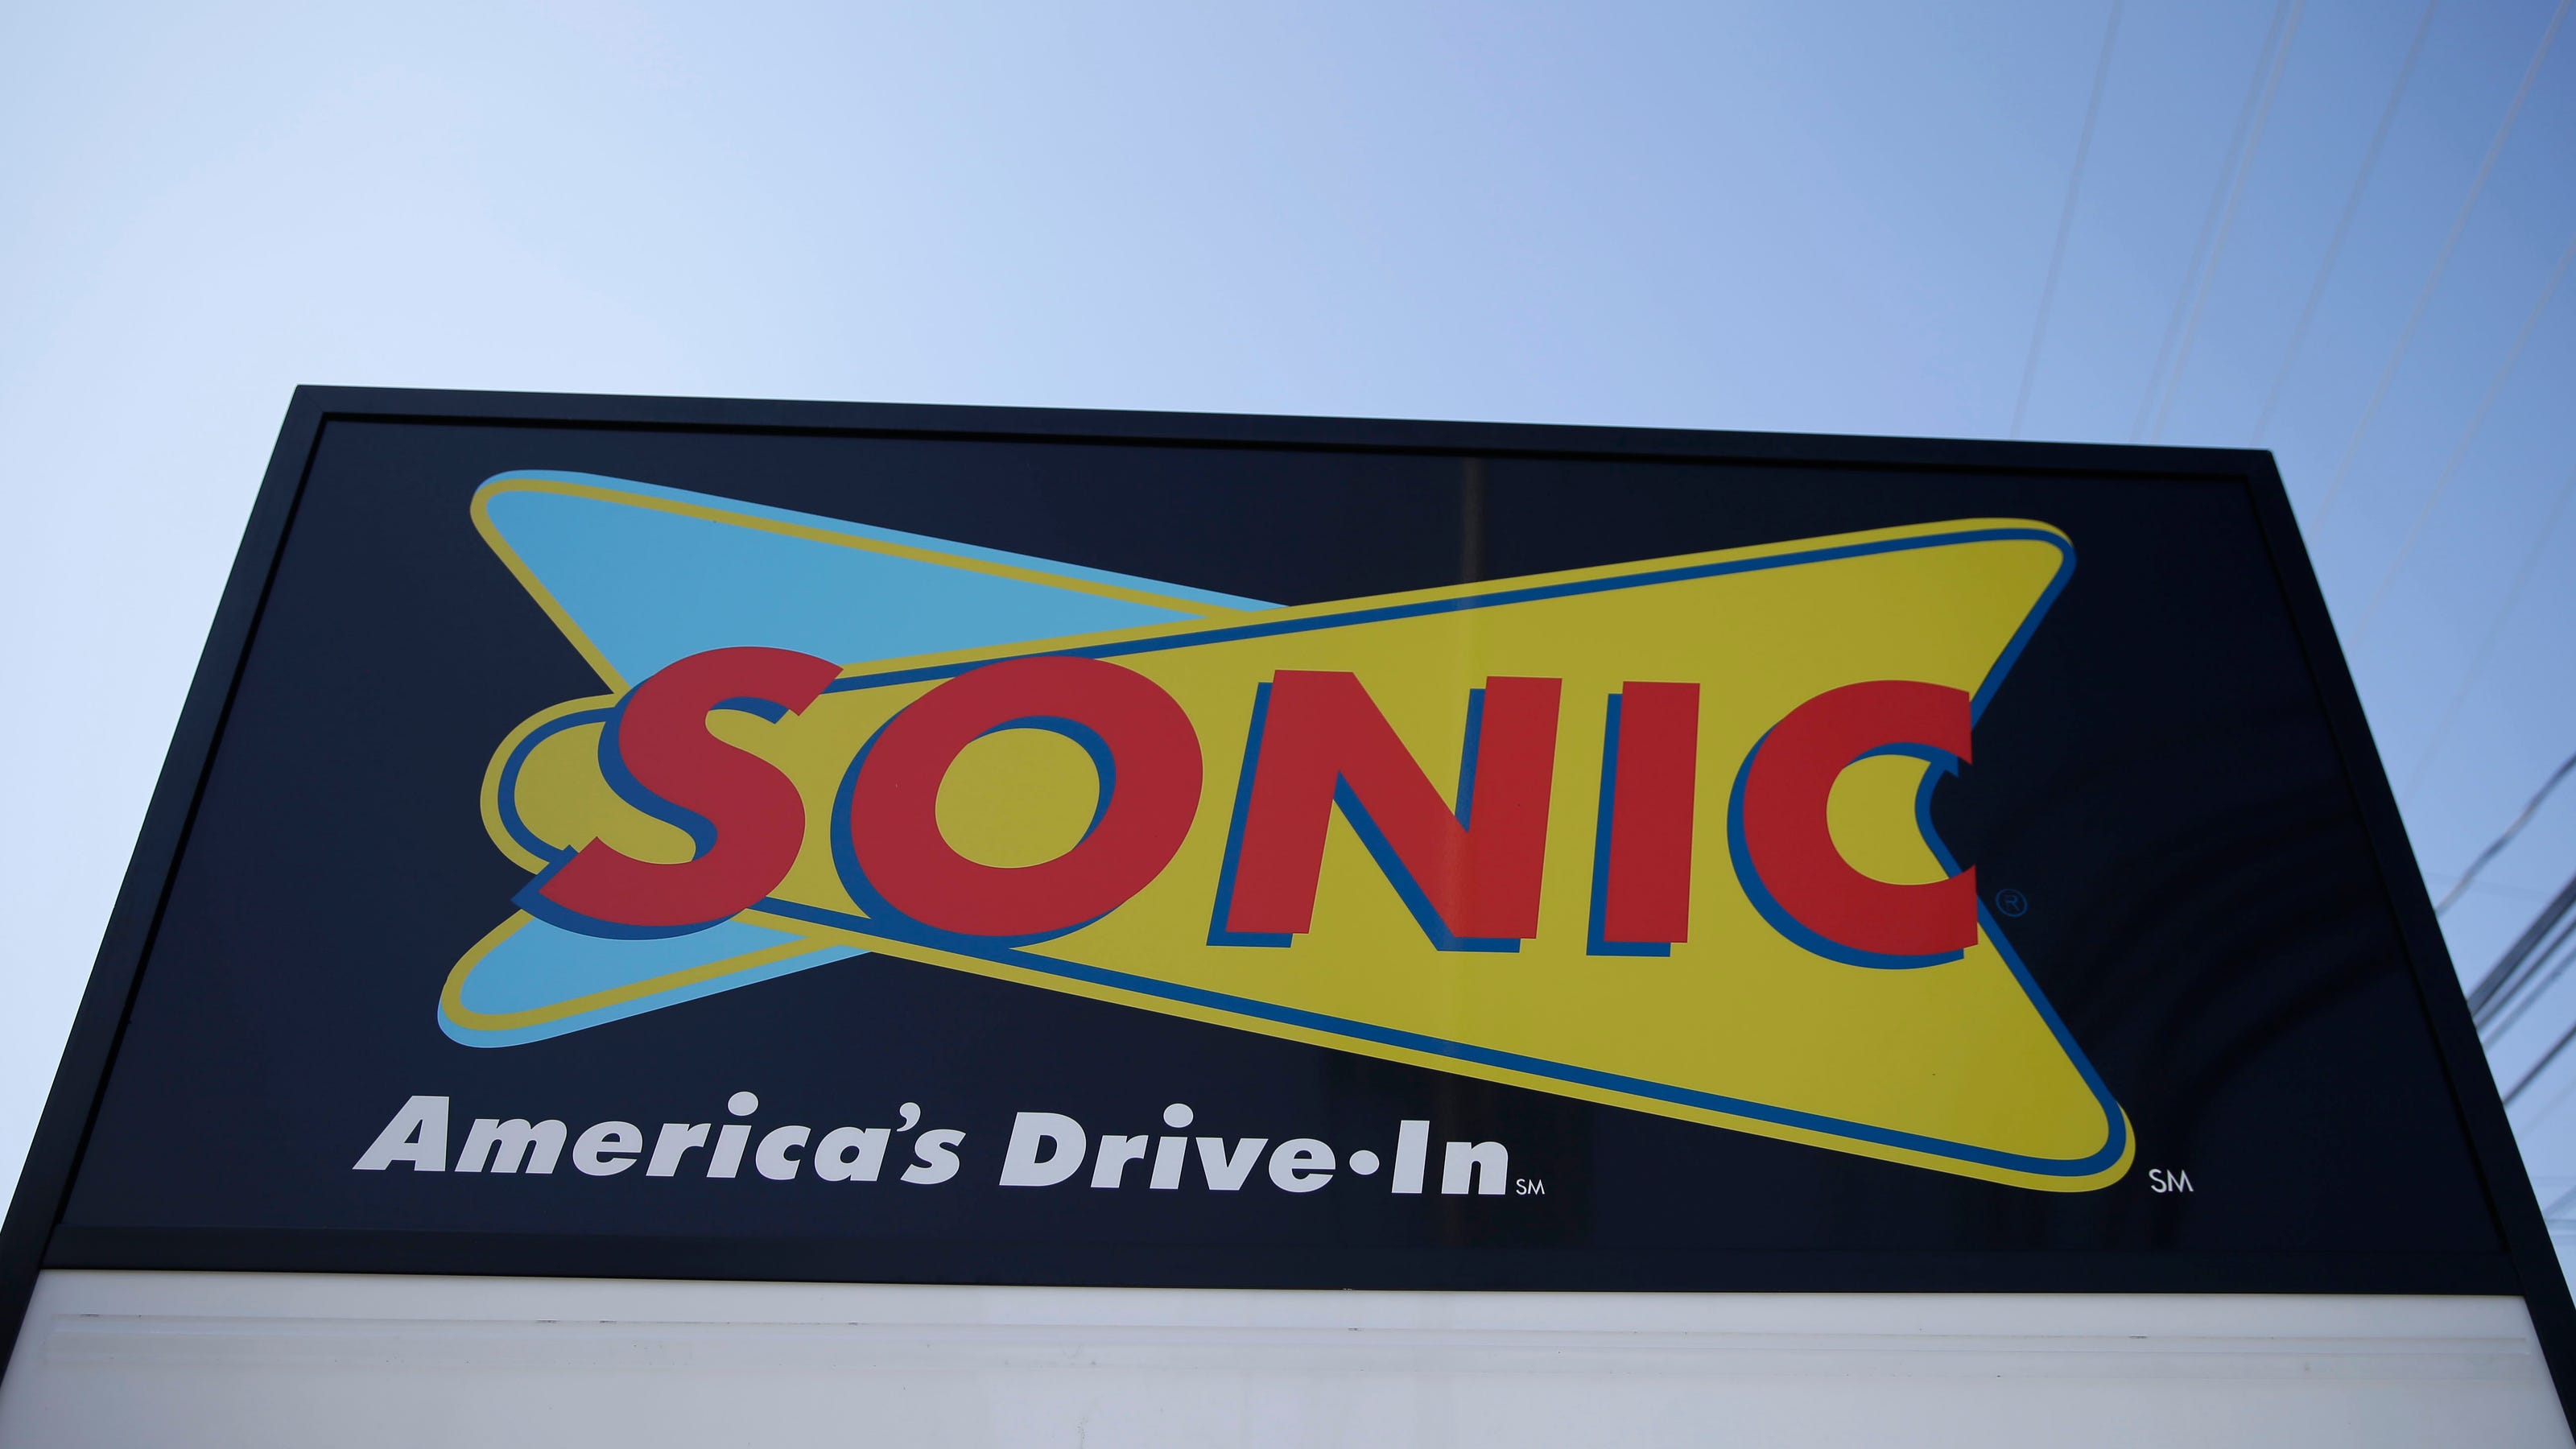 Arby's parent company to buy burger chain Sonic in $2.3 billion deal